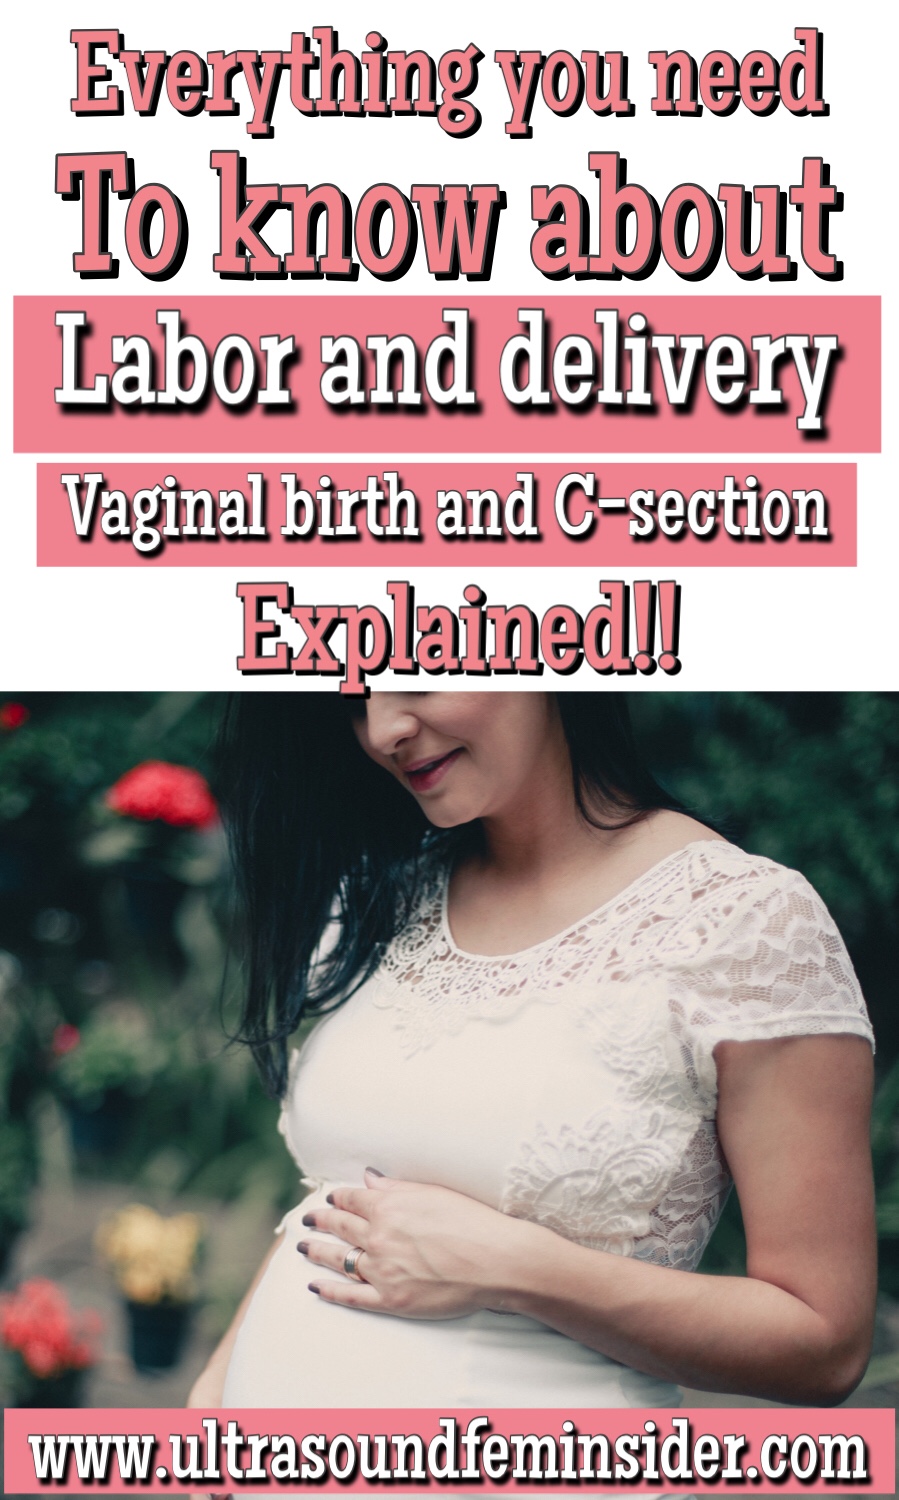 Important information about labor and delivery or childbirth. 